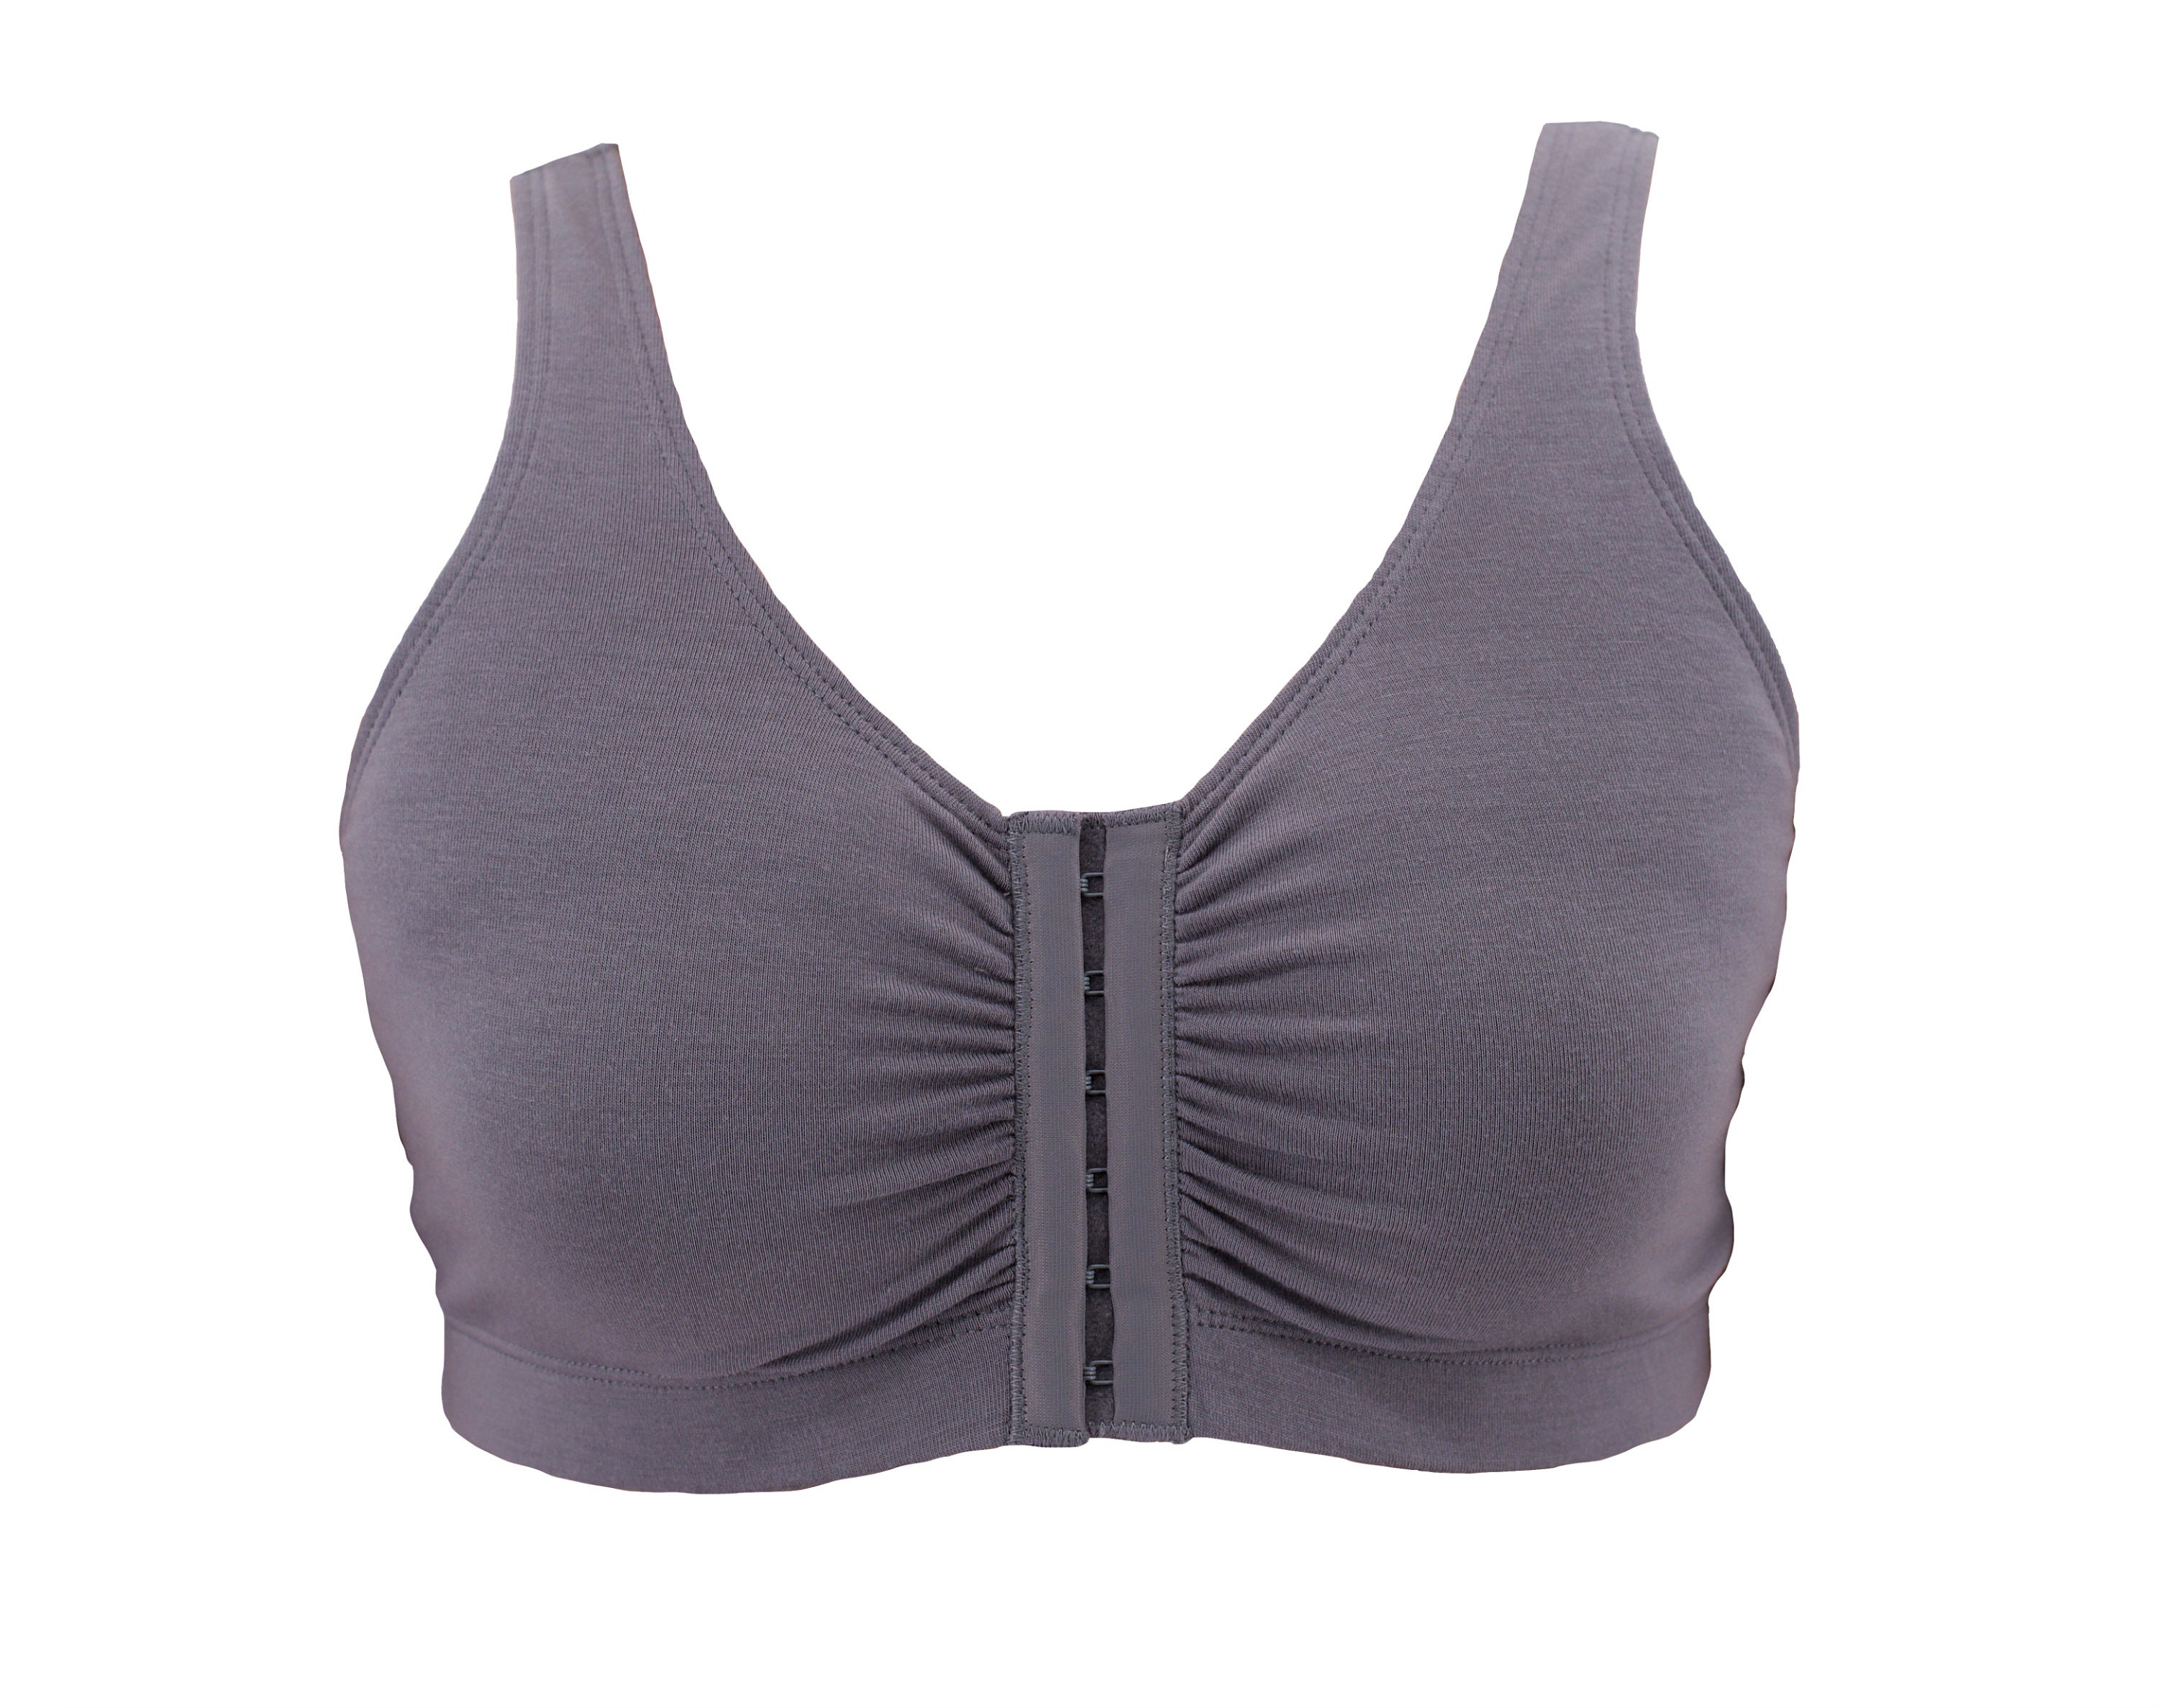 10 Best Bras For Post-Shoulder Surgery (Easy Wear), As Per An